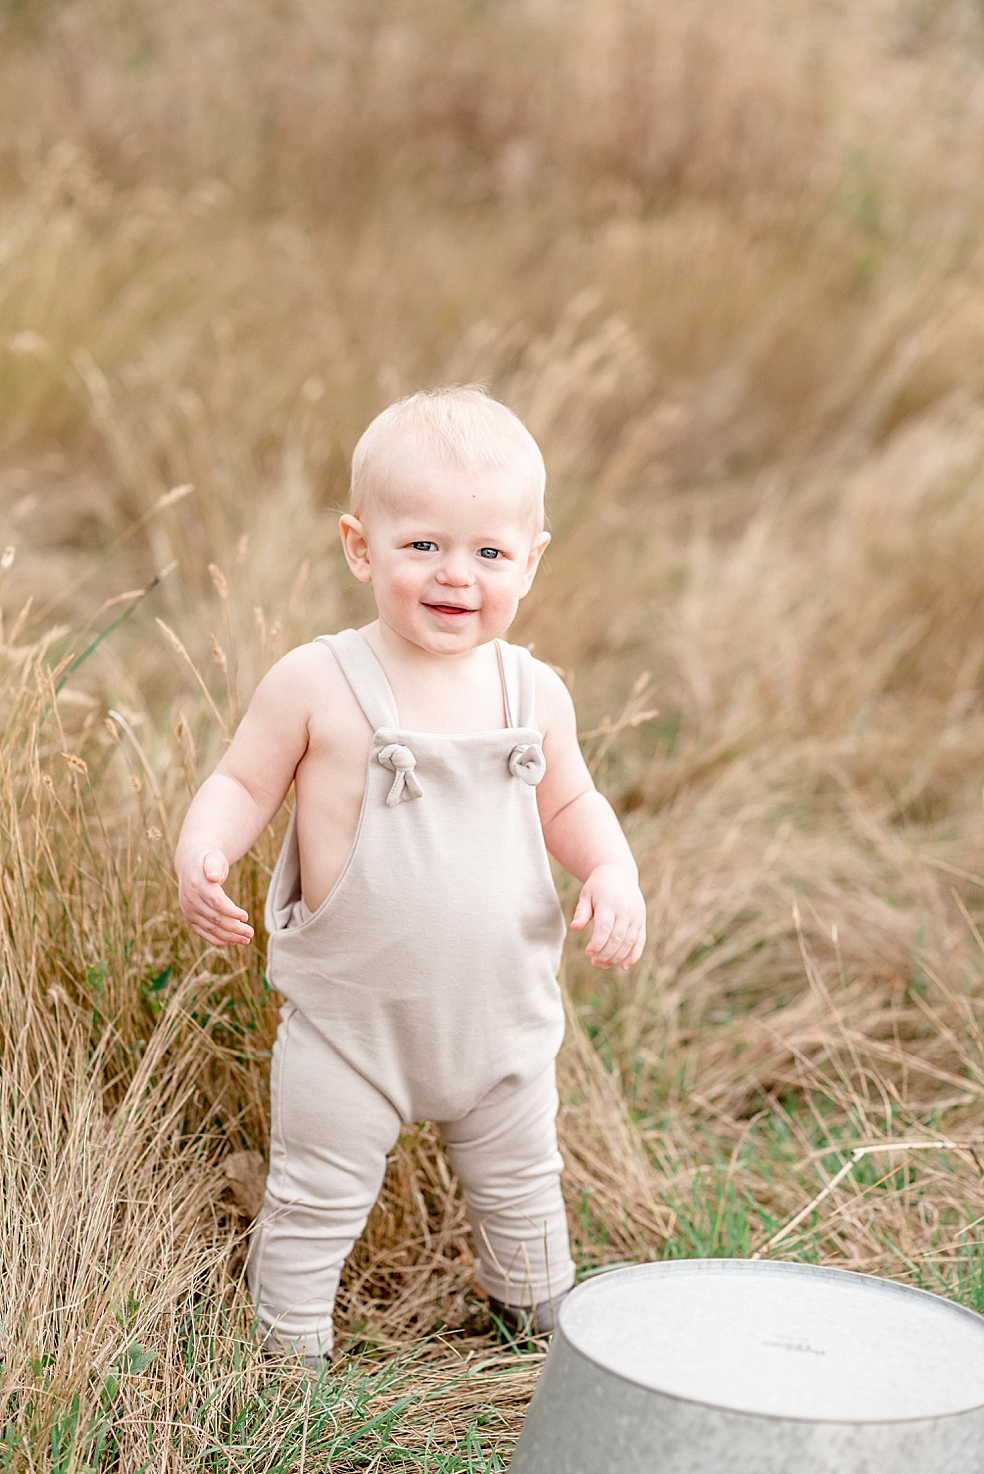 Smiling toddler boy in a field | Photo by Jessica Lee Photography 